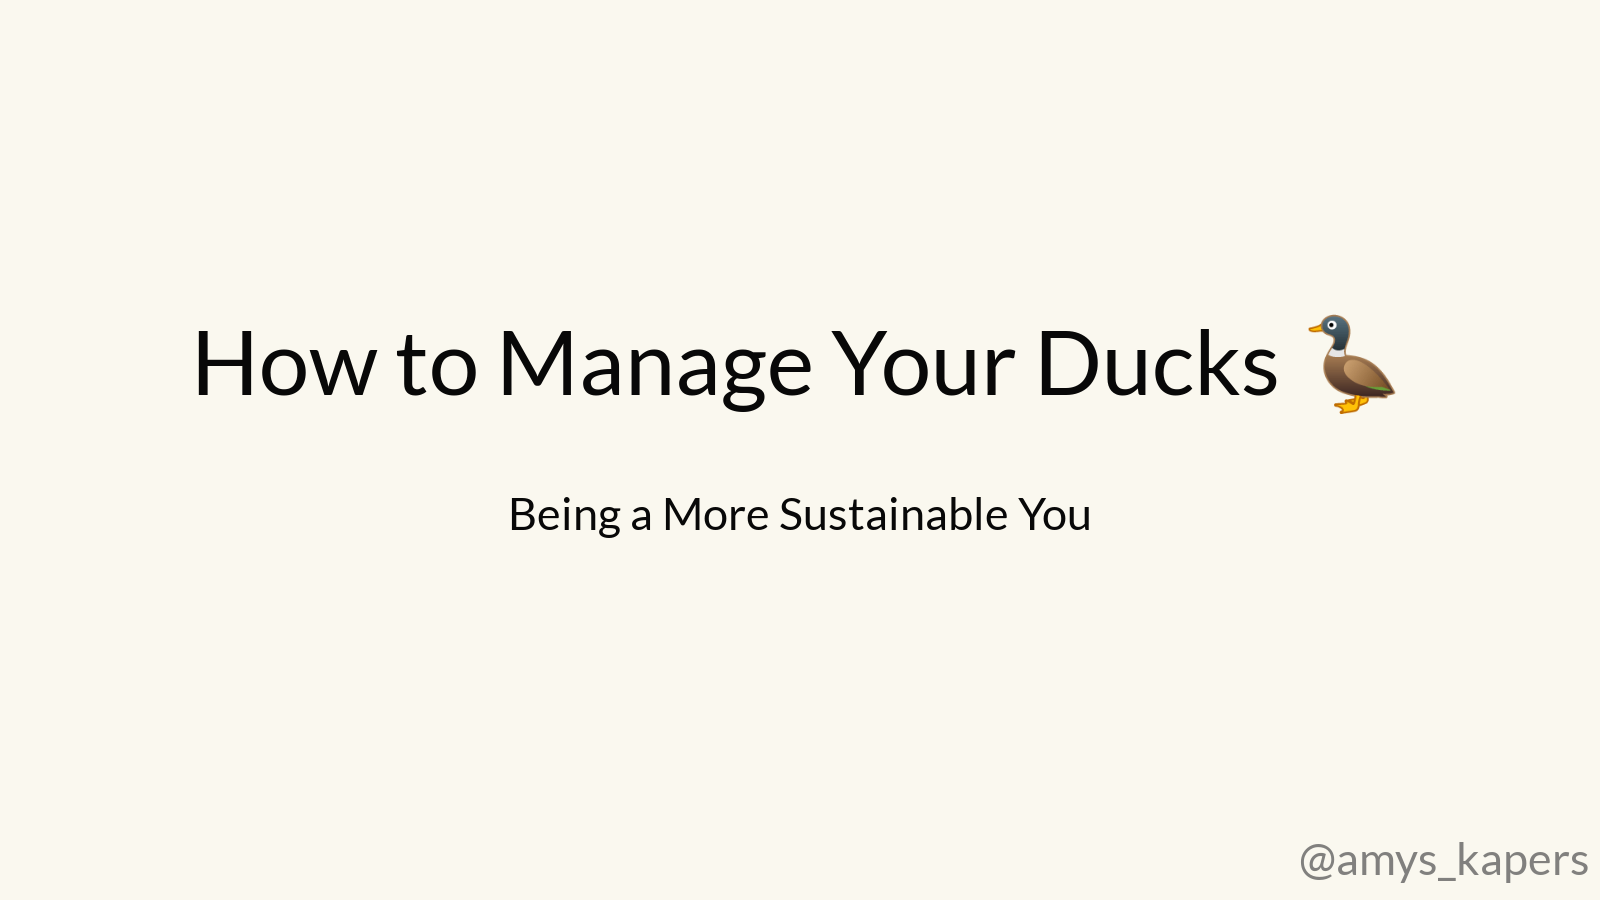 How to Manage Your Ducks